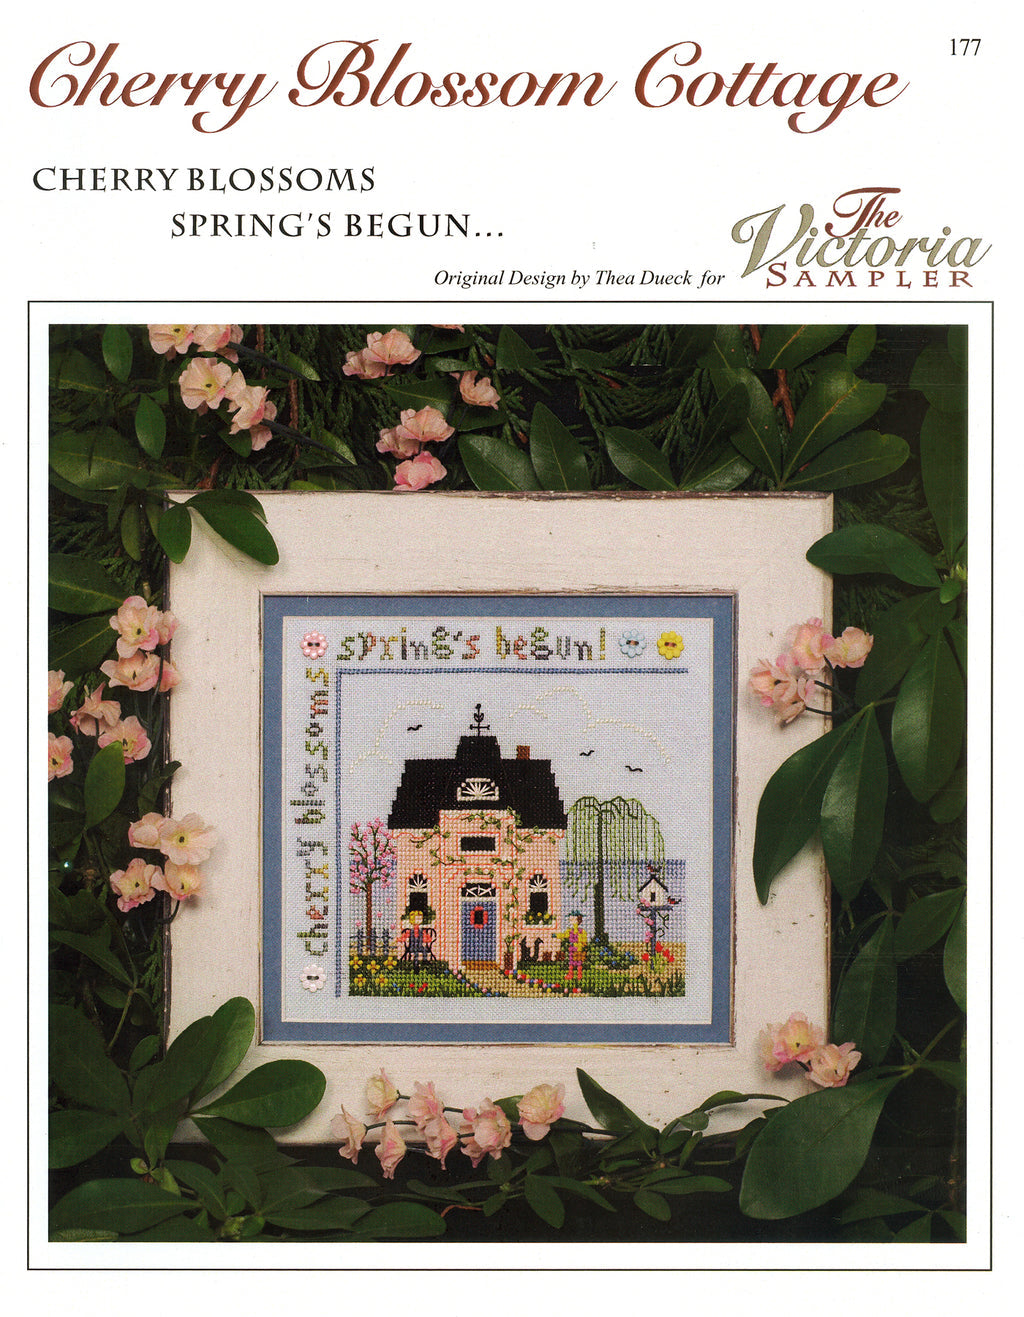 Cherry Blossom Cottage By The Victoria Sampler 177